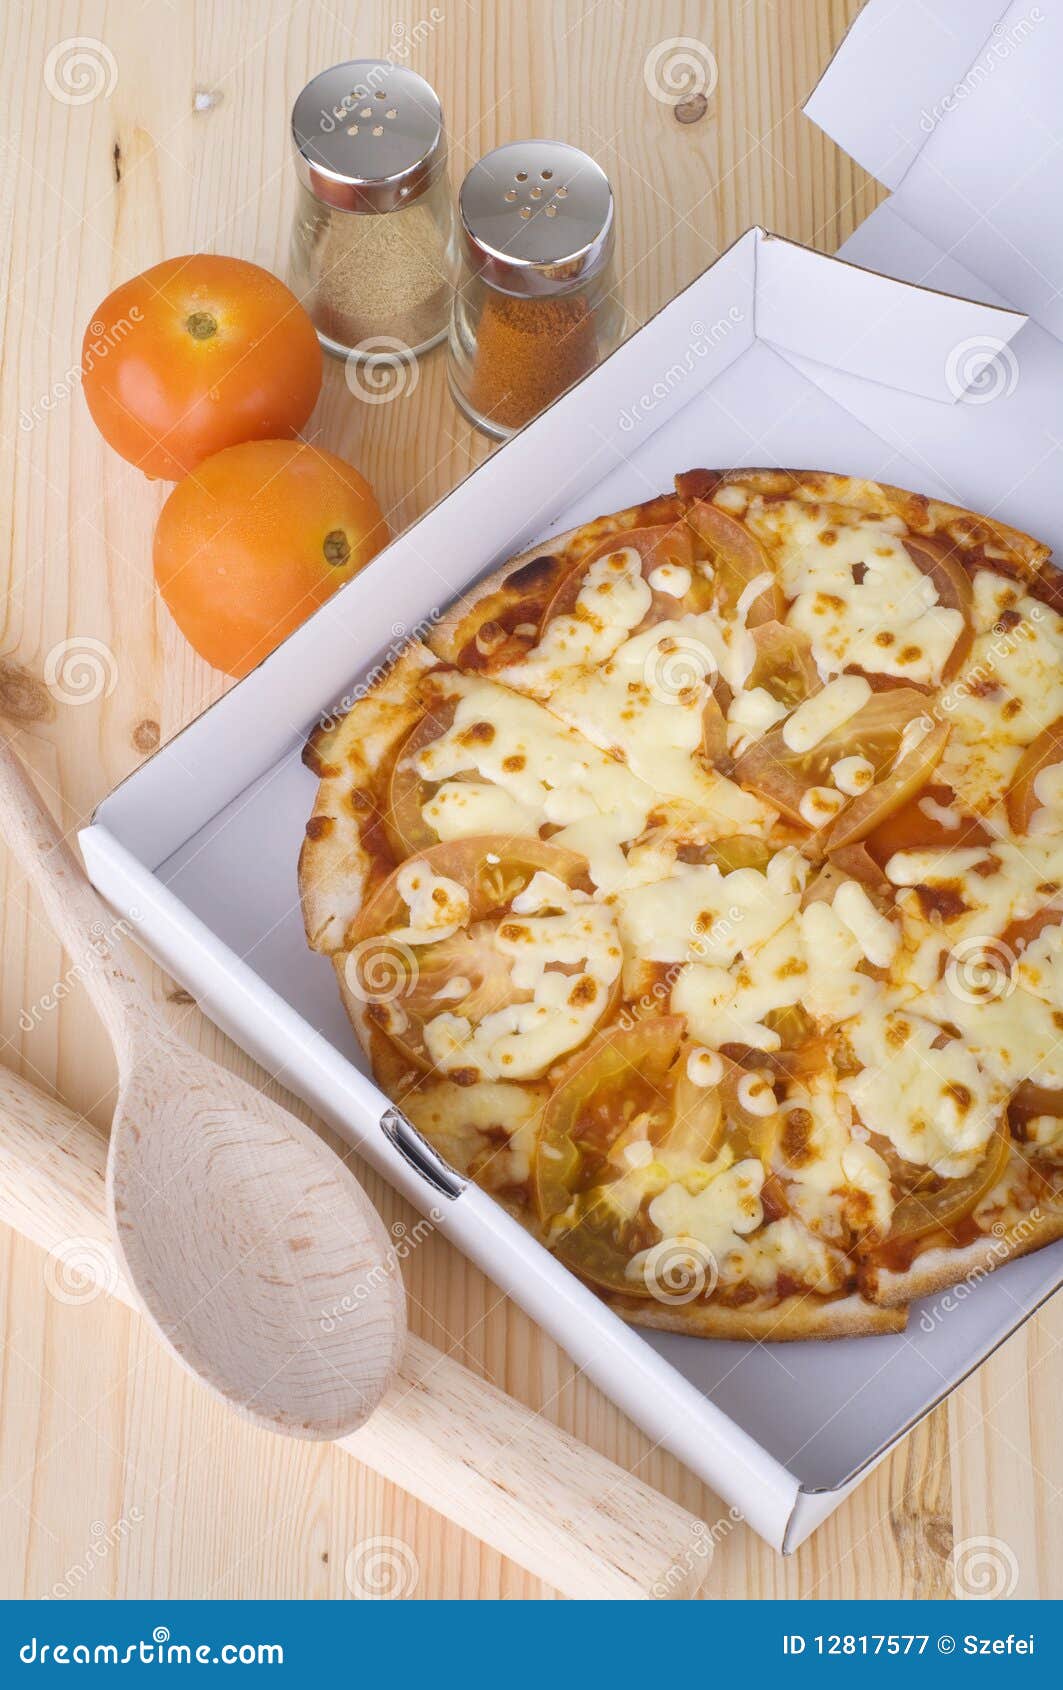 Pizza delivery stock image. Image of eating, fast, gourmet - 12817577